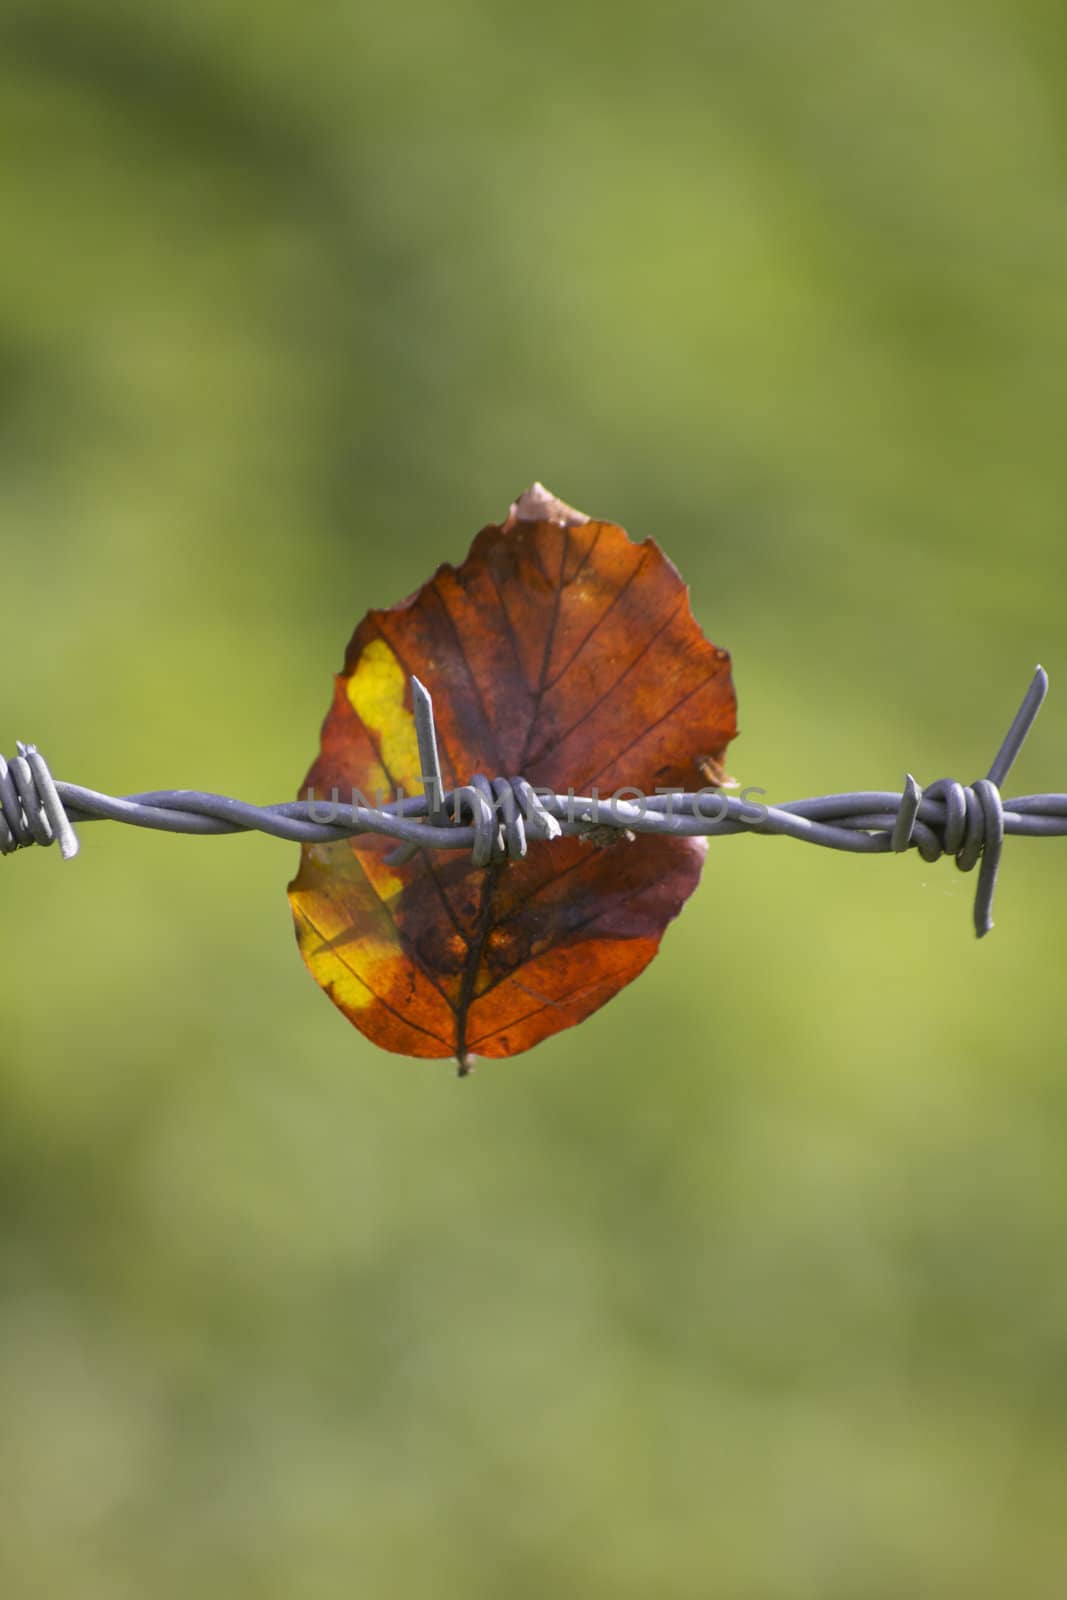 A single autumnal colored leaf stuck on a piece of barbed wire fencing. set on a soft focus green background on a portrait format image.